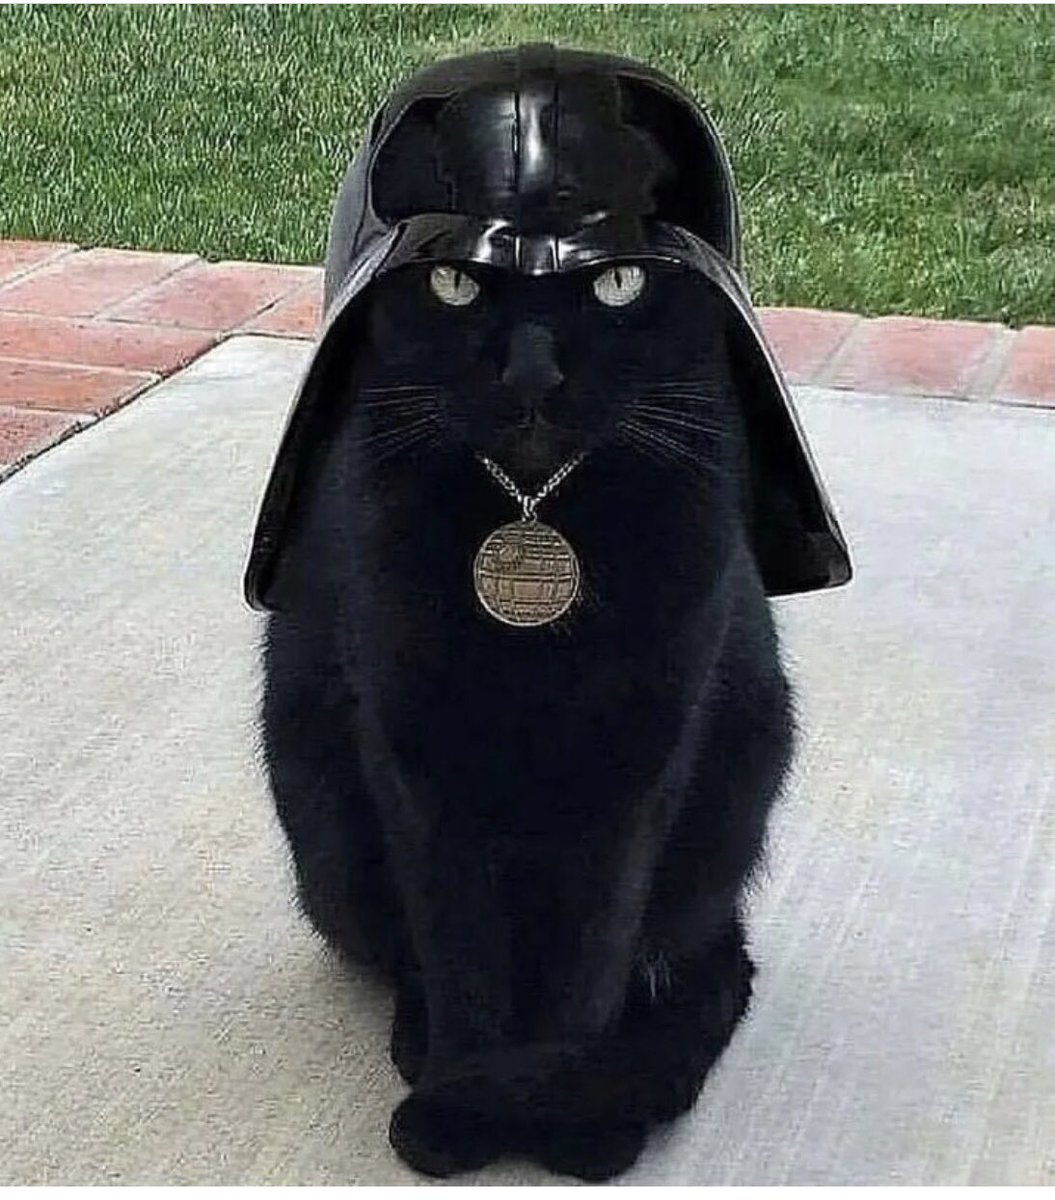 #May4thBeWithYou 
#Caterday